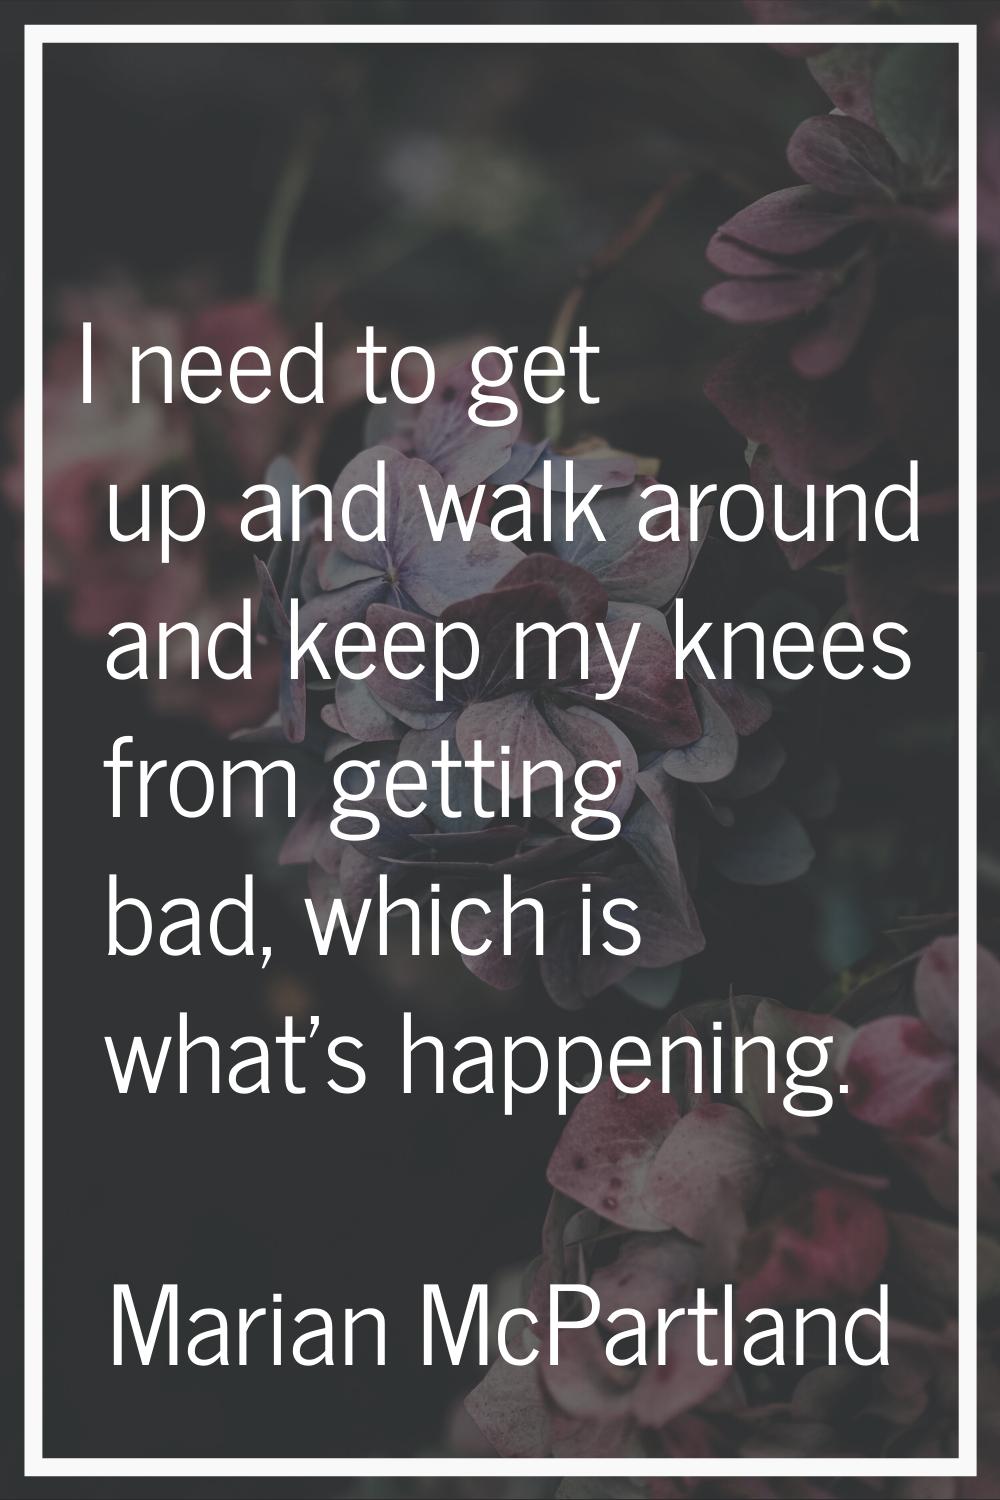 I need to get up and walk around and keep my knees from getting bad, which is what's happening.